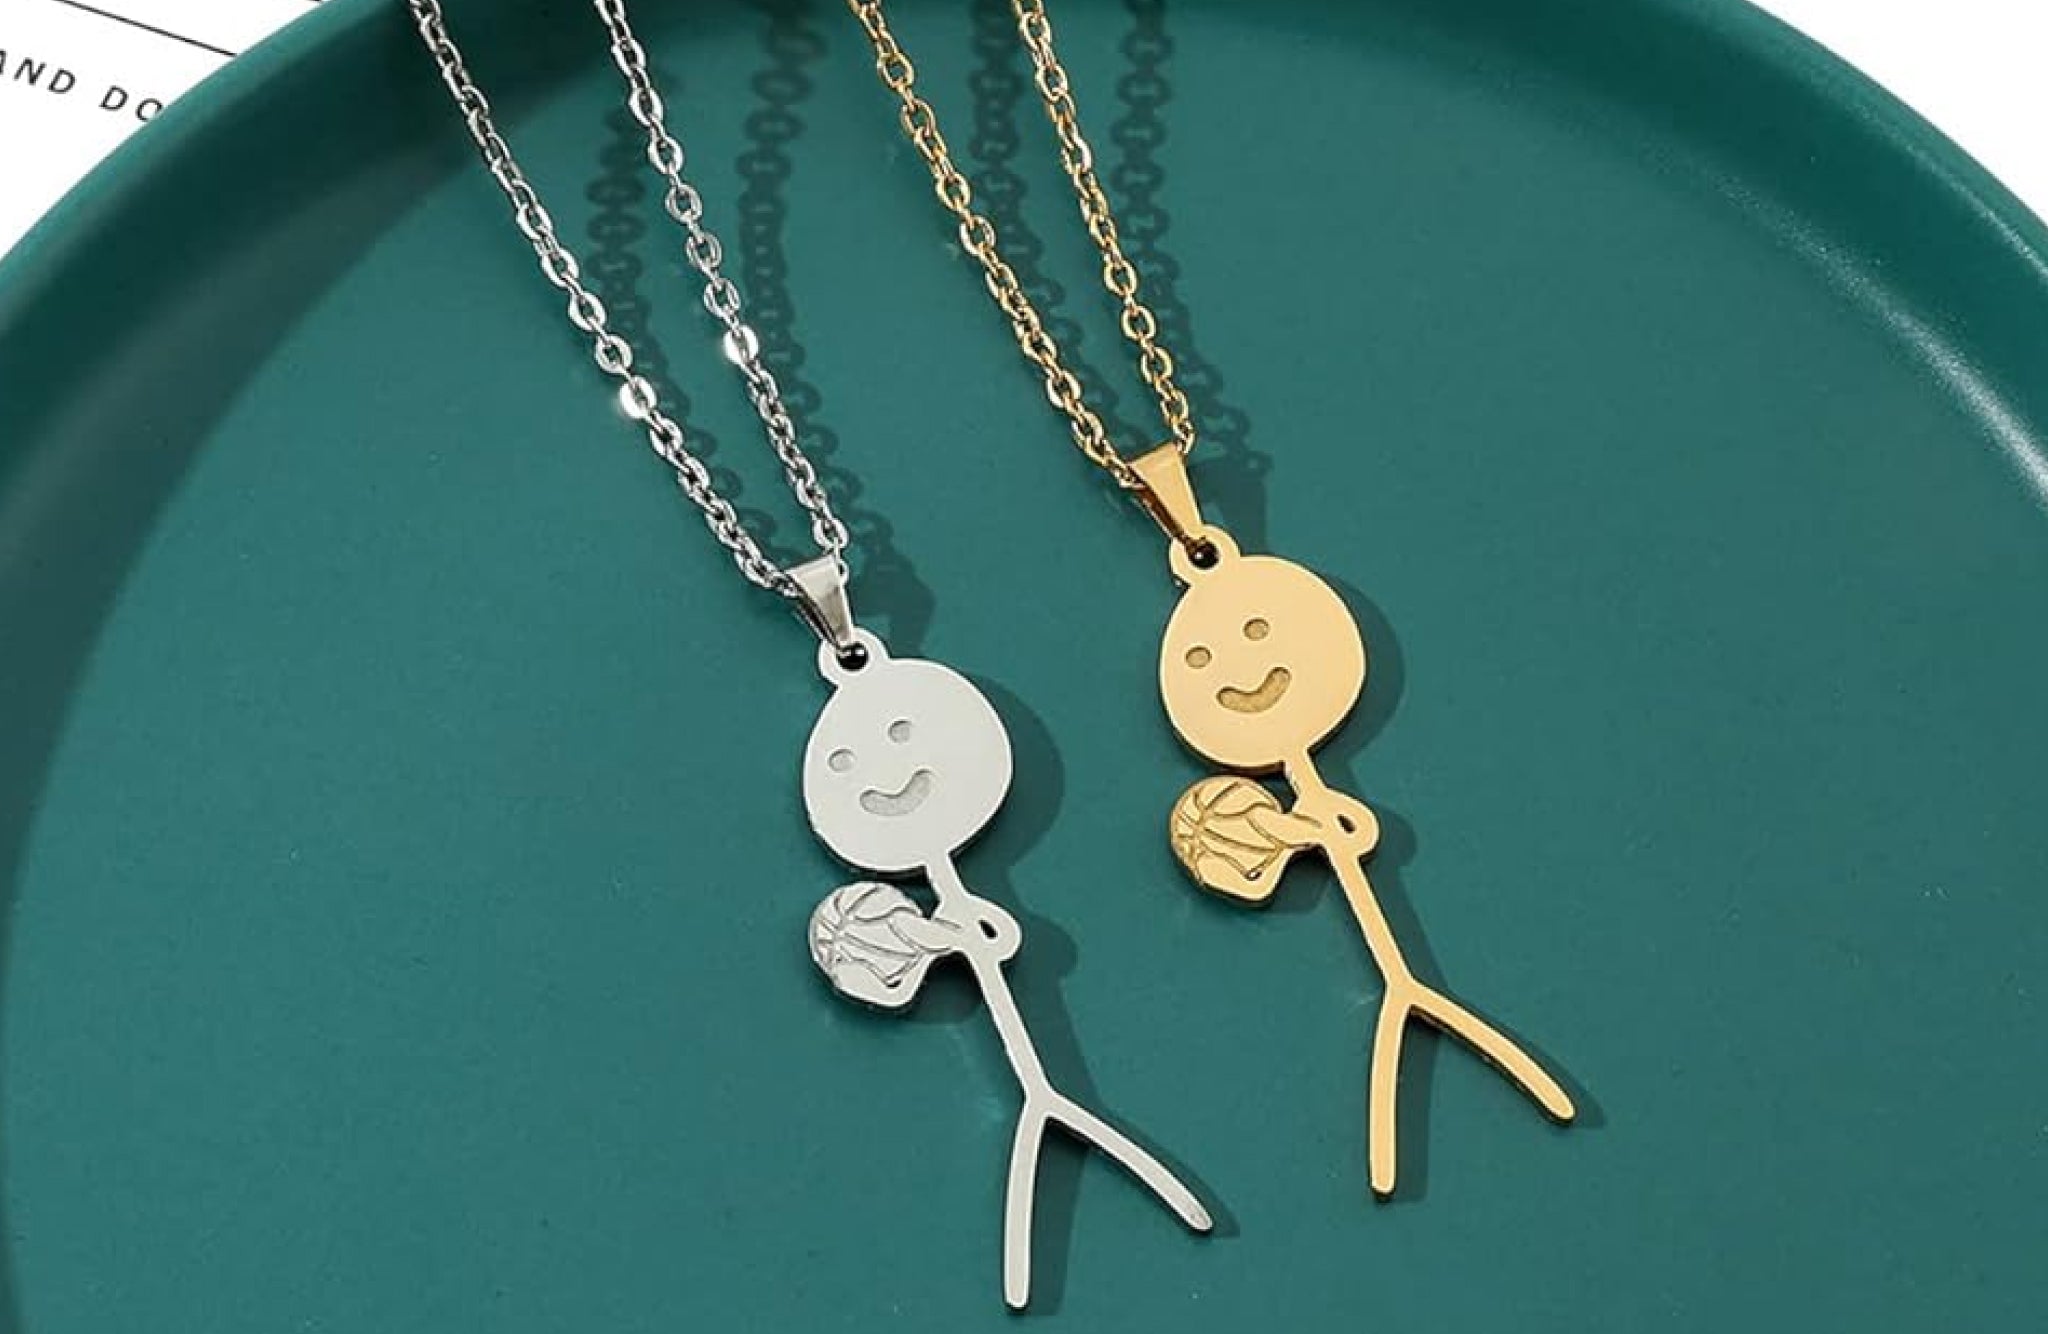 gifts that start with letter N: Necklace